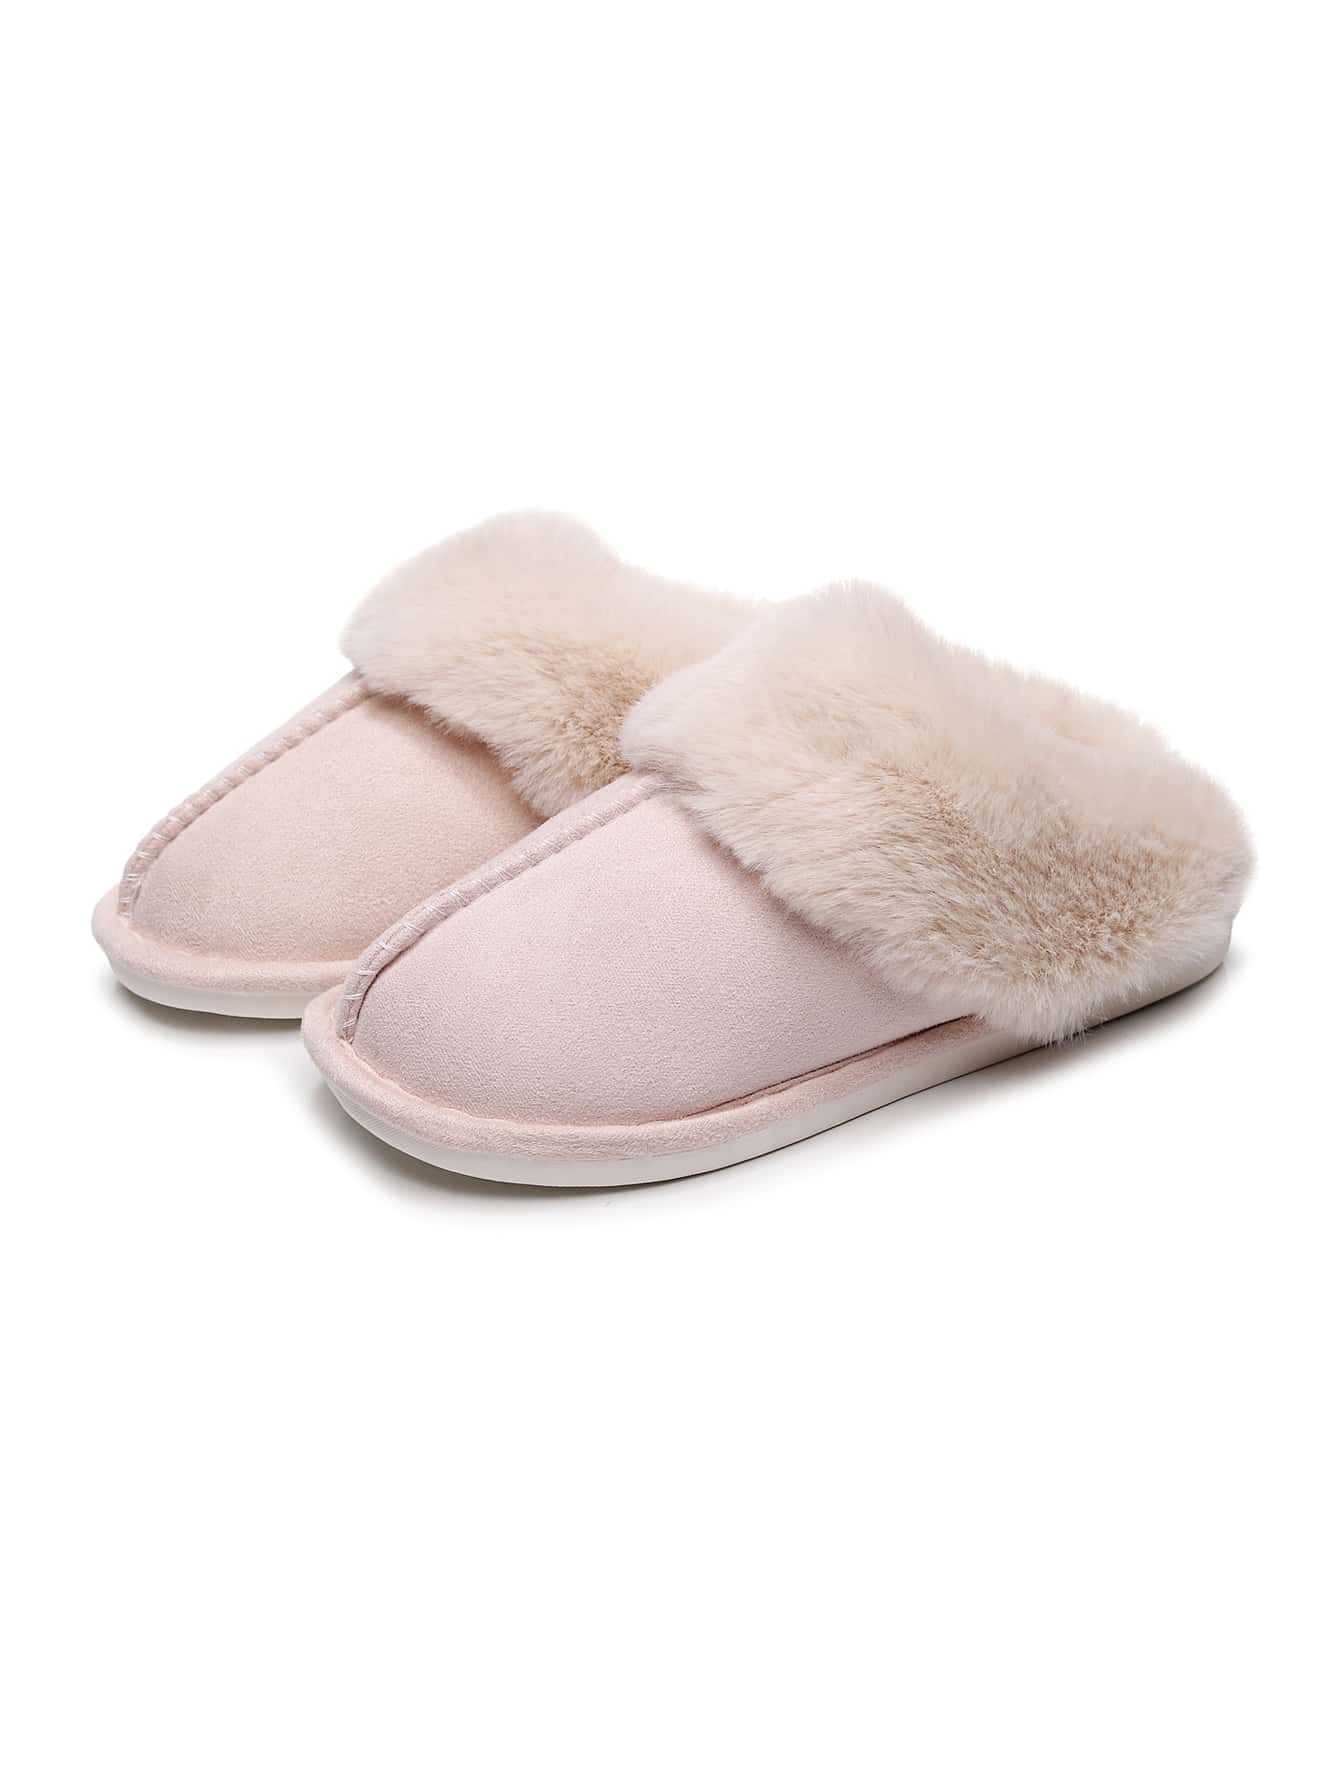 Women Thermal Lined Bedroom Slippers, Polyester Fashion Home Soft Warm Anti Slippers | SHEIN